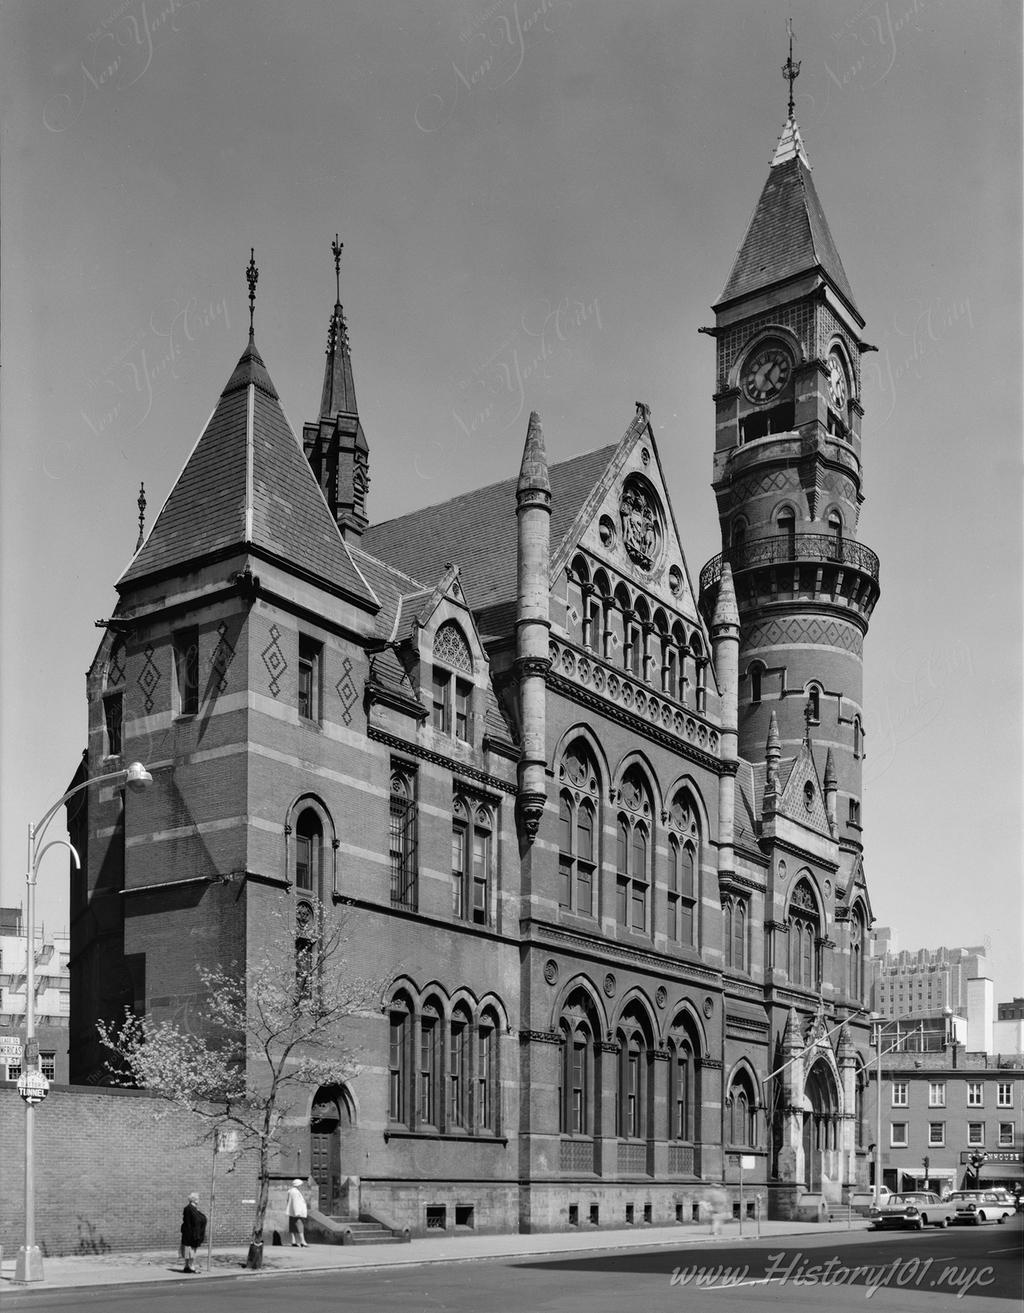 Photograph of Jefferson Market Library, formely Third Judicial District Courthouse on 425 Avenue of the Americas.